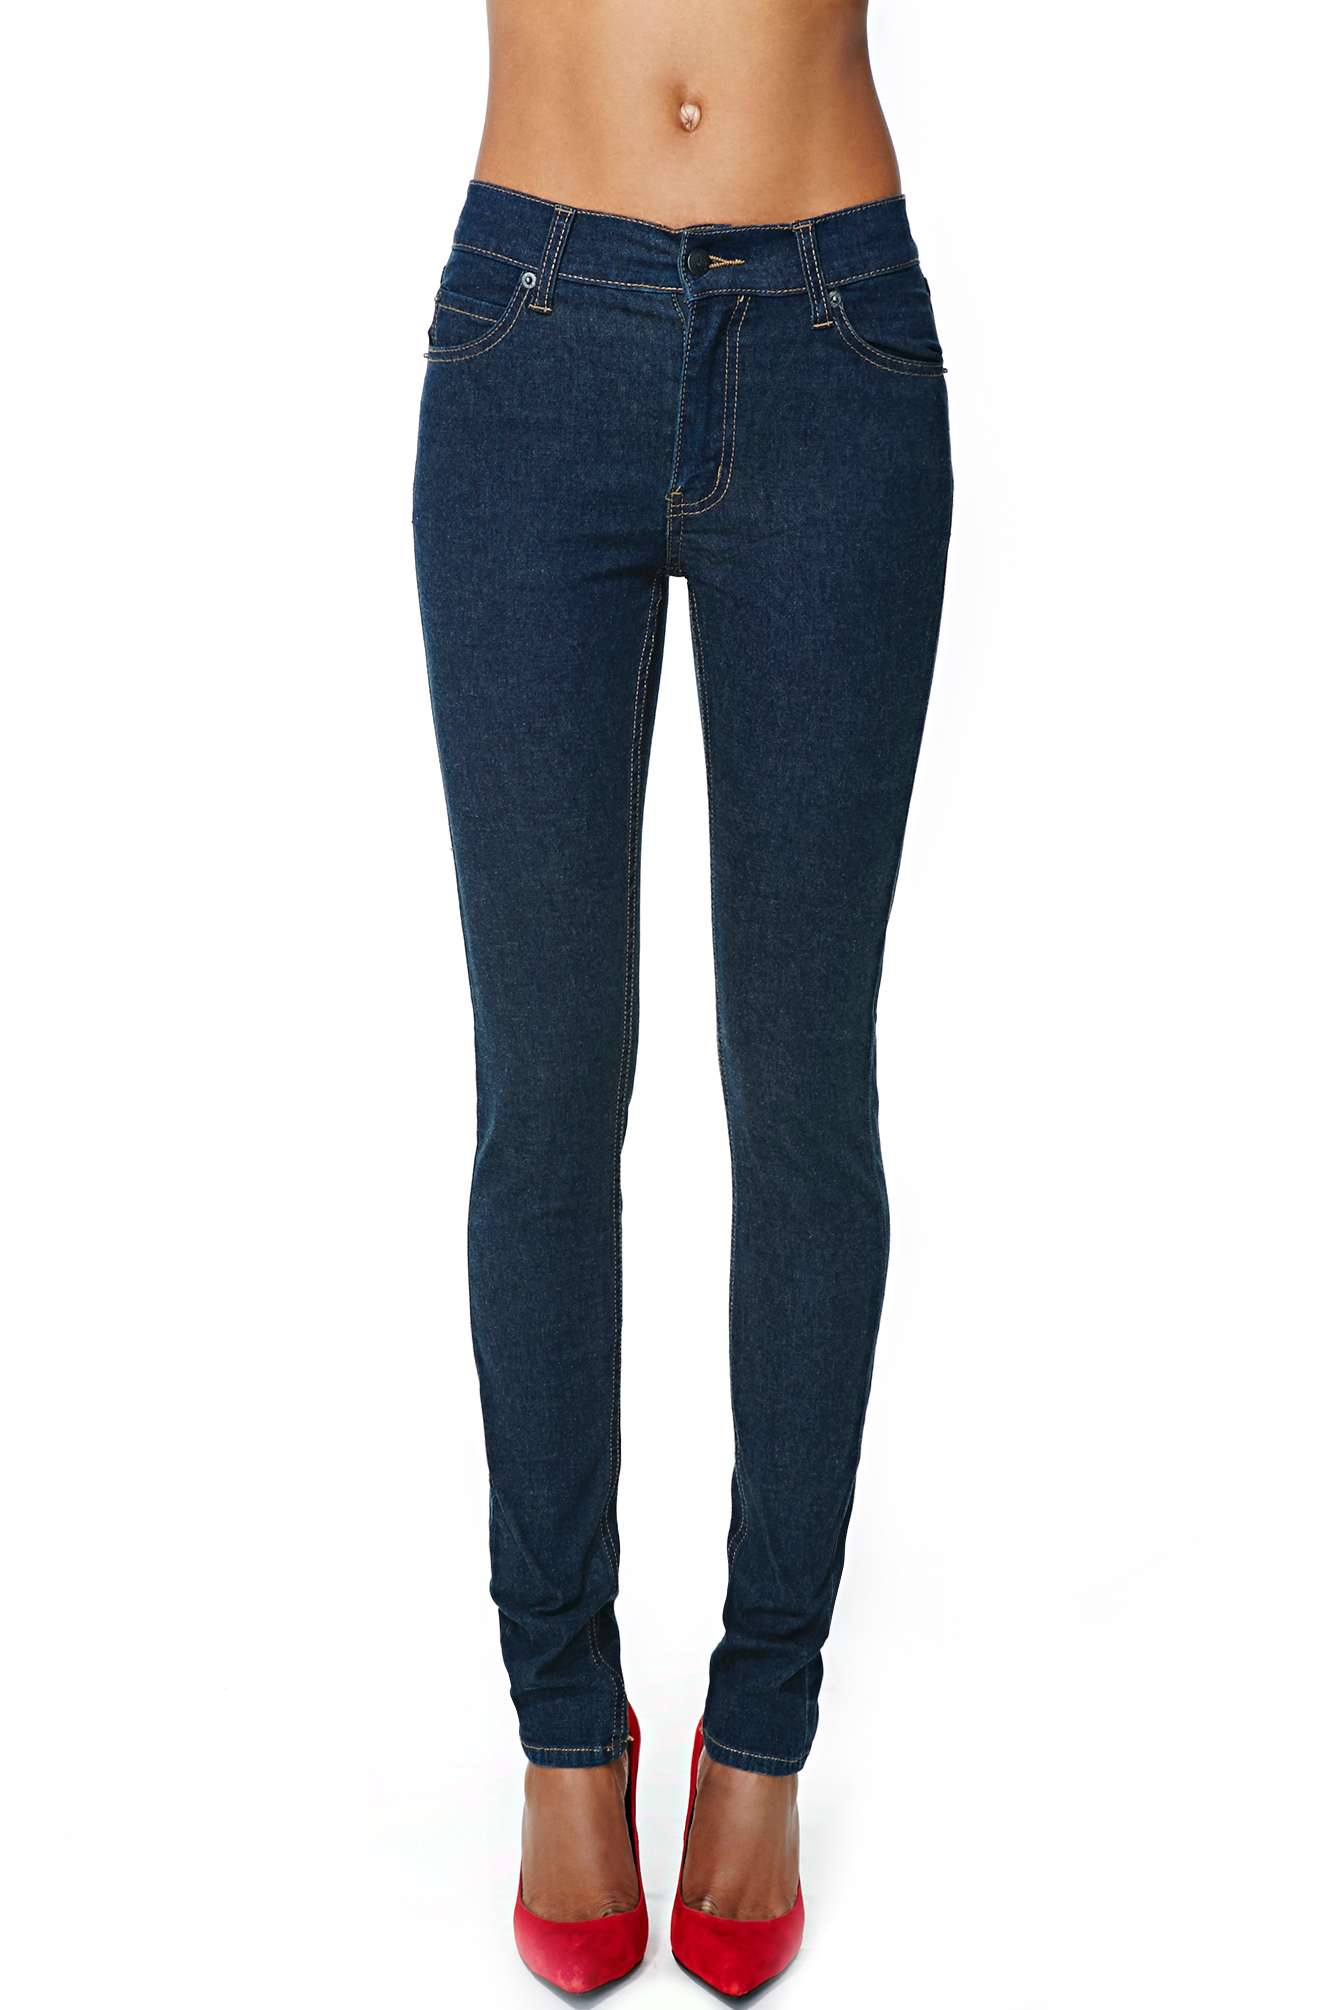 Lyst Nasty Gal Cheap Monday Tight Skinny Jeans Very Stretch One Wash